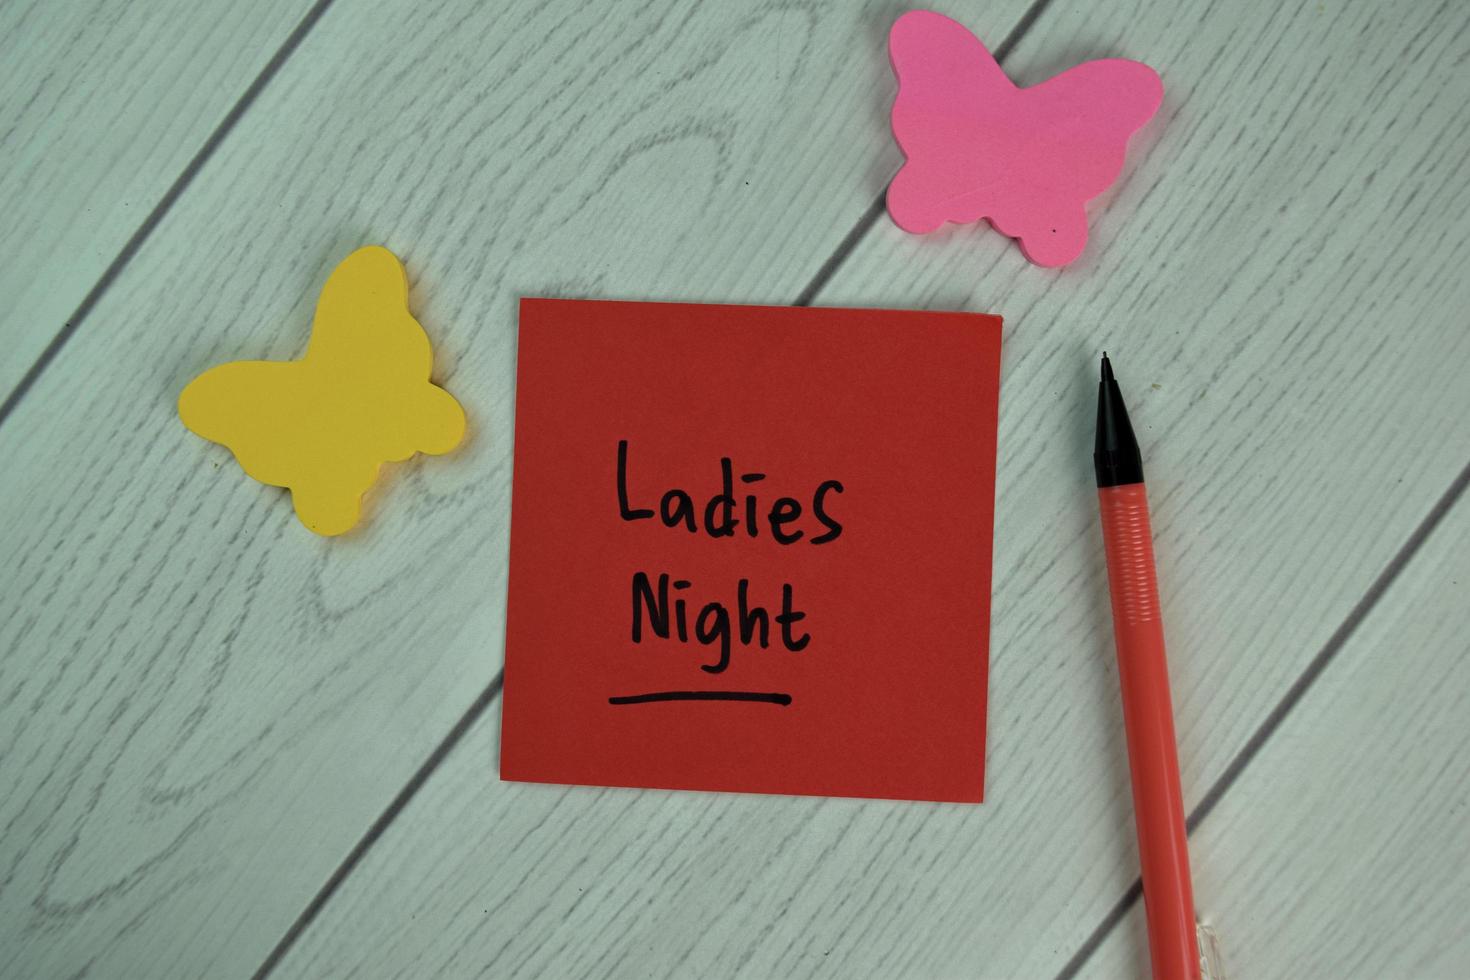 Ladies Night written on sticky note isolated on wooden table photo